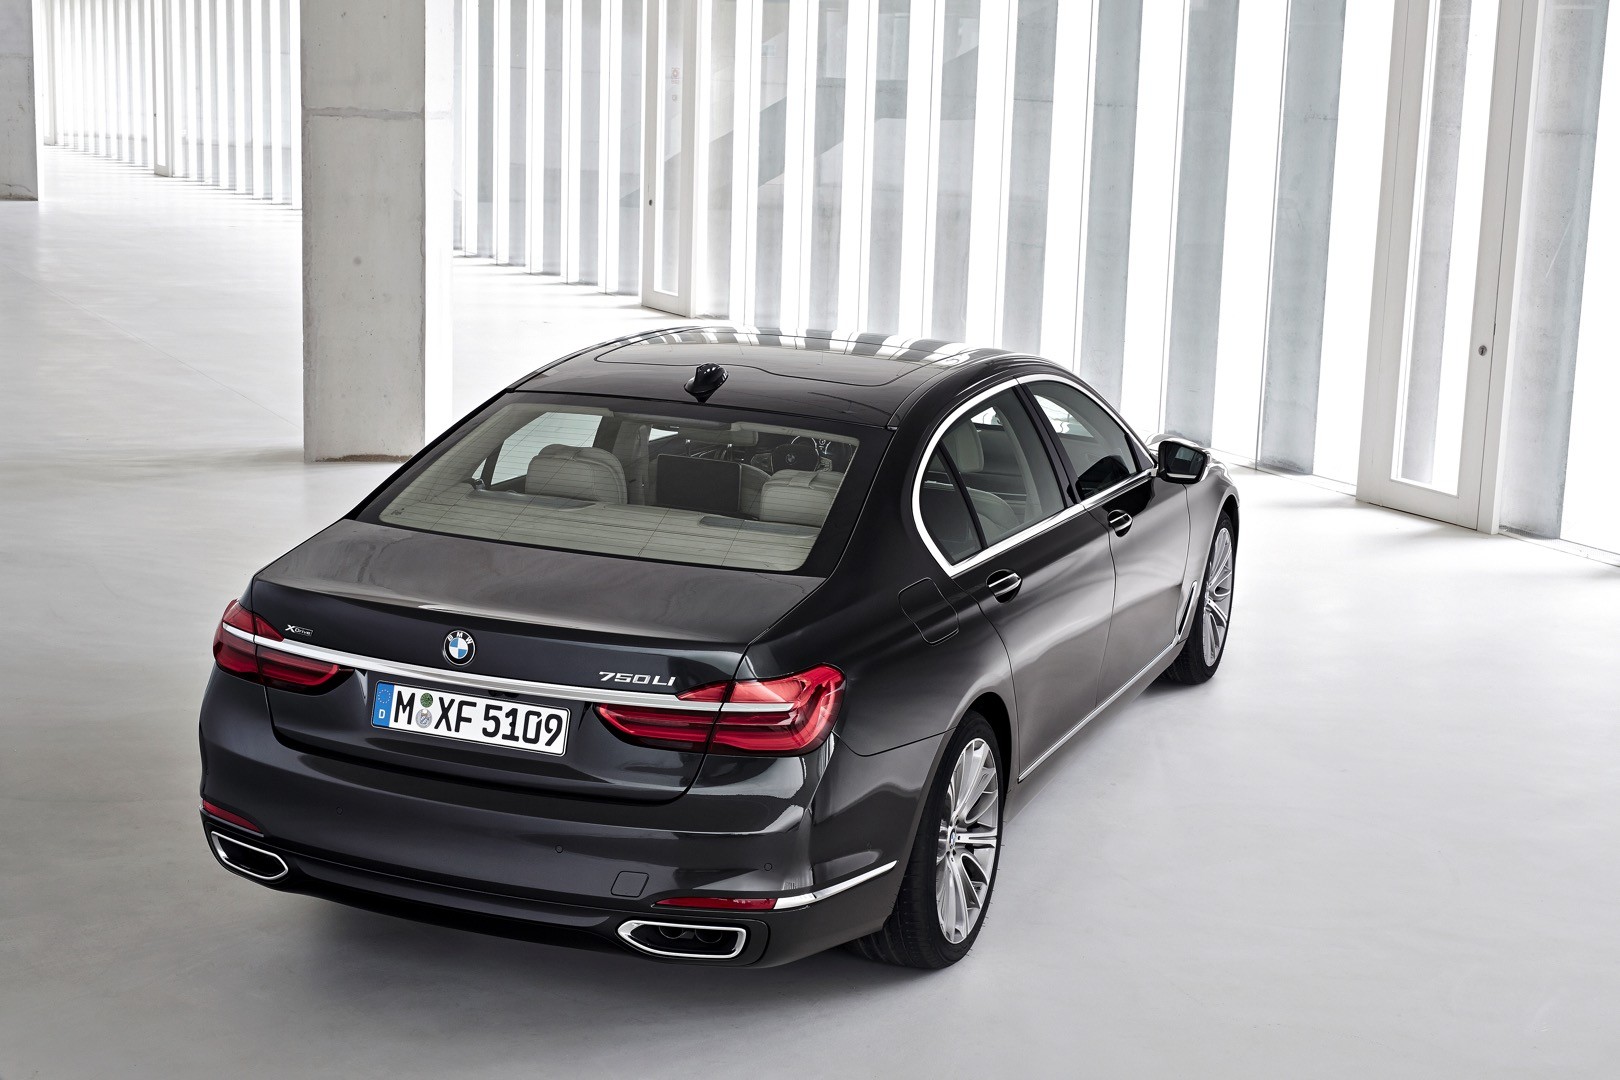 2016-bmw-7-series-finally-officially-unveiled-the-good-stuffs-inside-photo-gallery_23